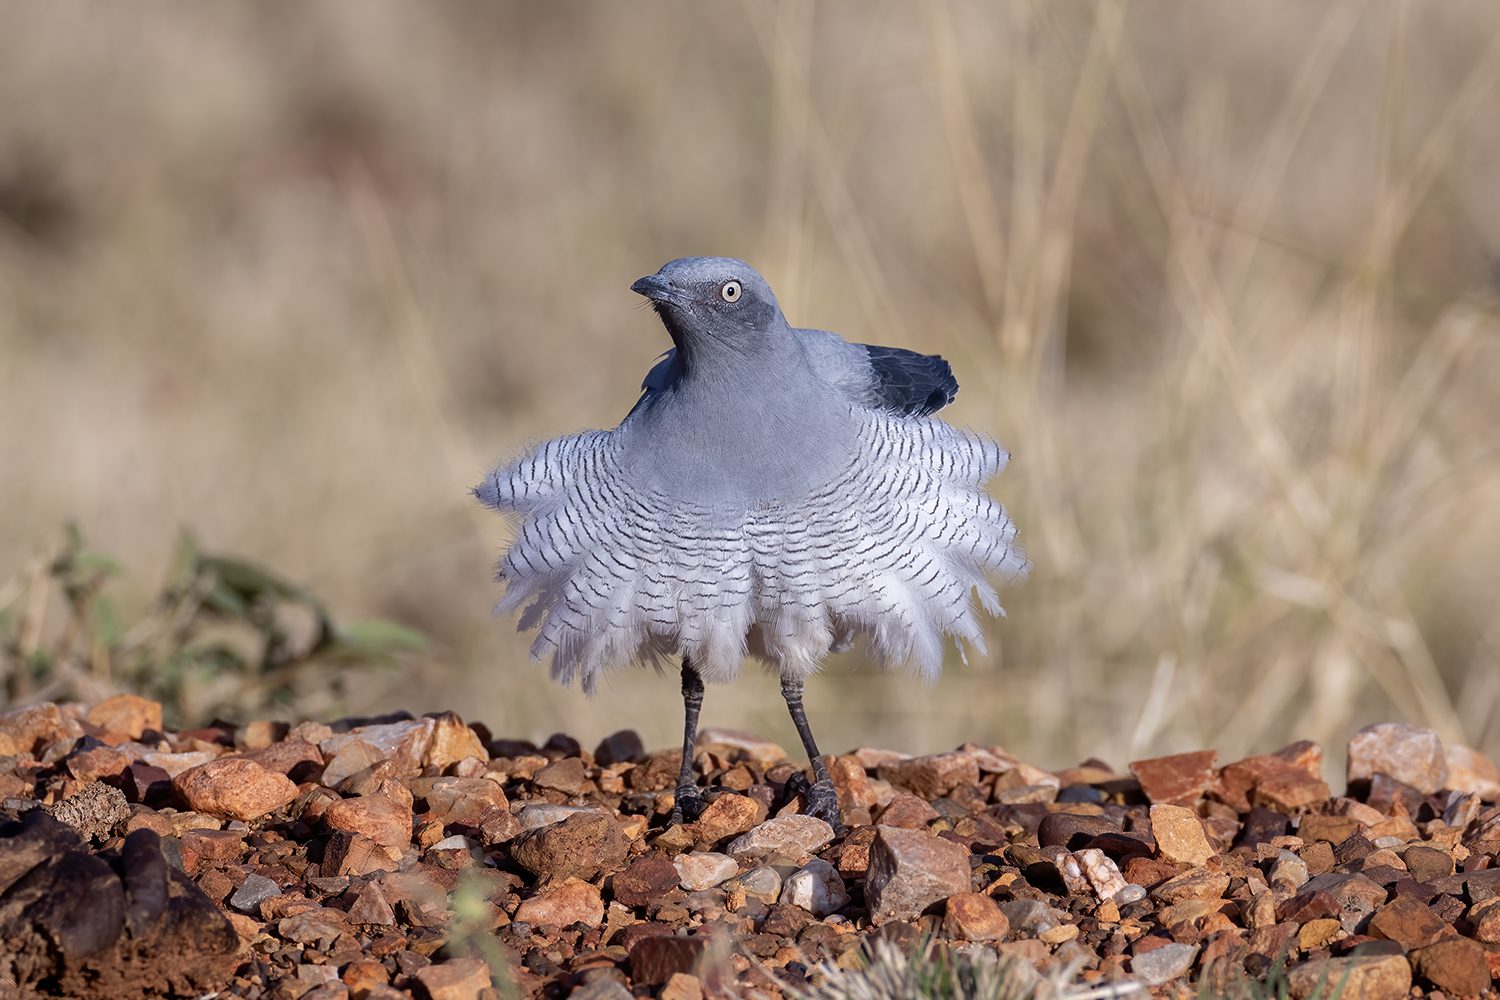 A gray bird with a "skirt" of fluffed out gray and white striped feathers.